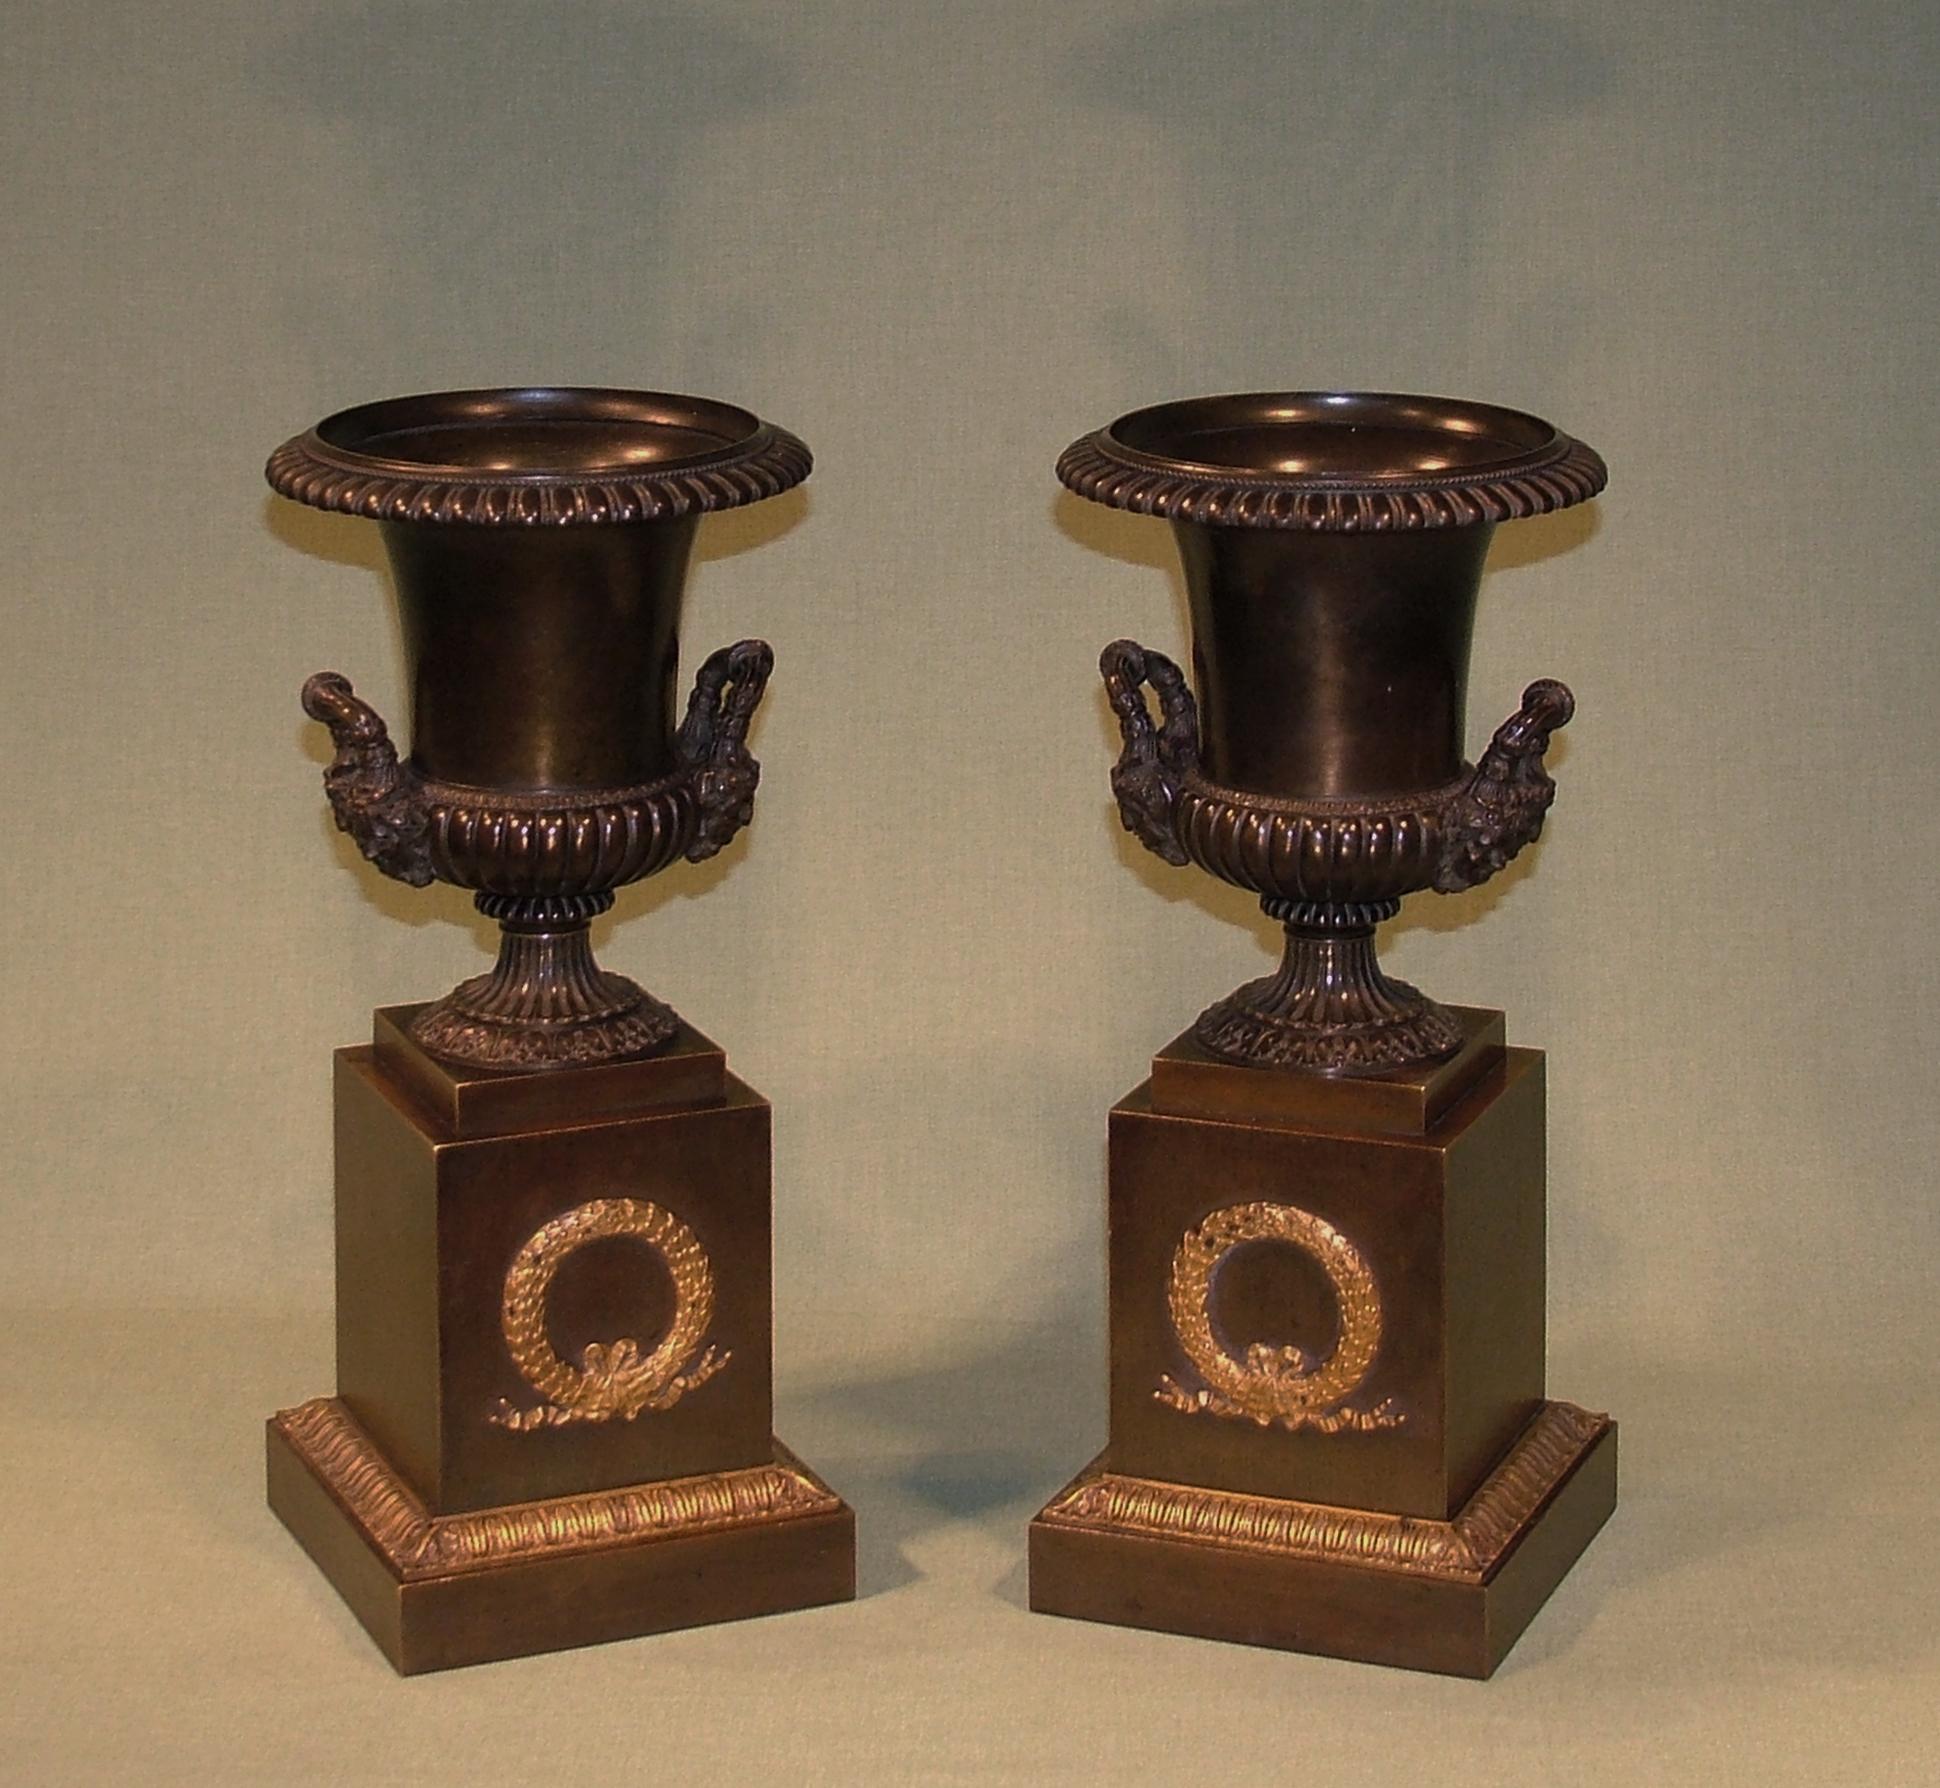 English Fine Pair of Early 19th Century Bronze and Ormolu Campana Shaped Urns For Sale